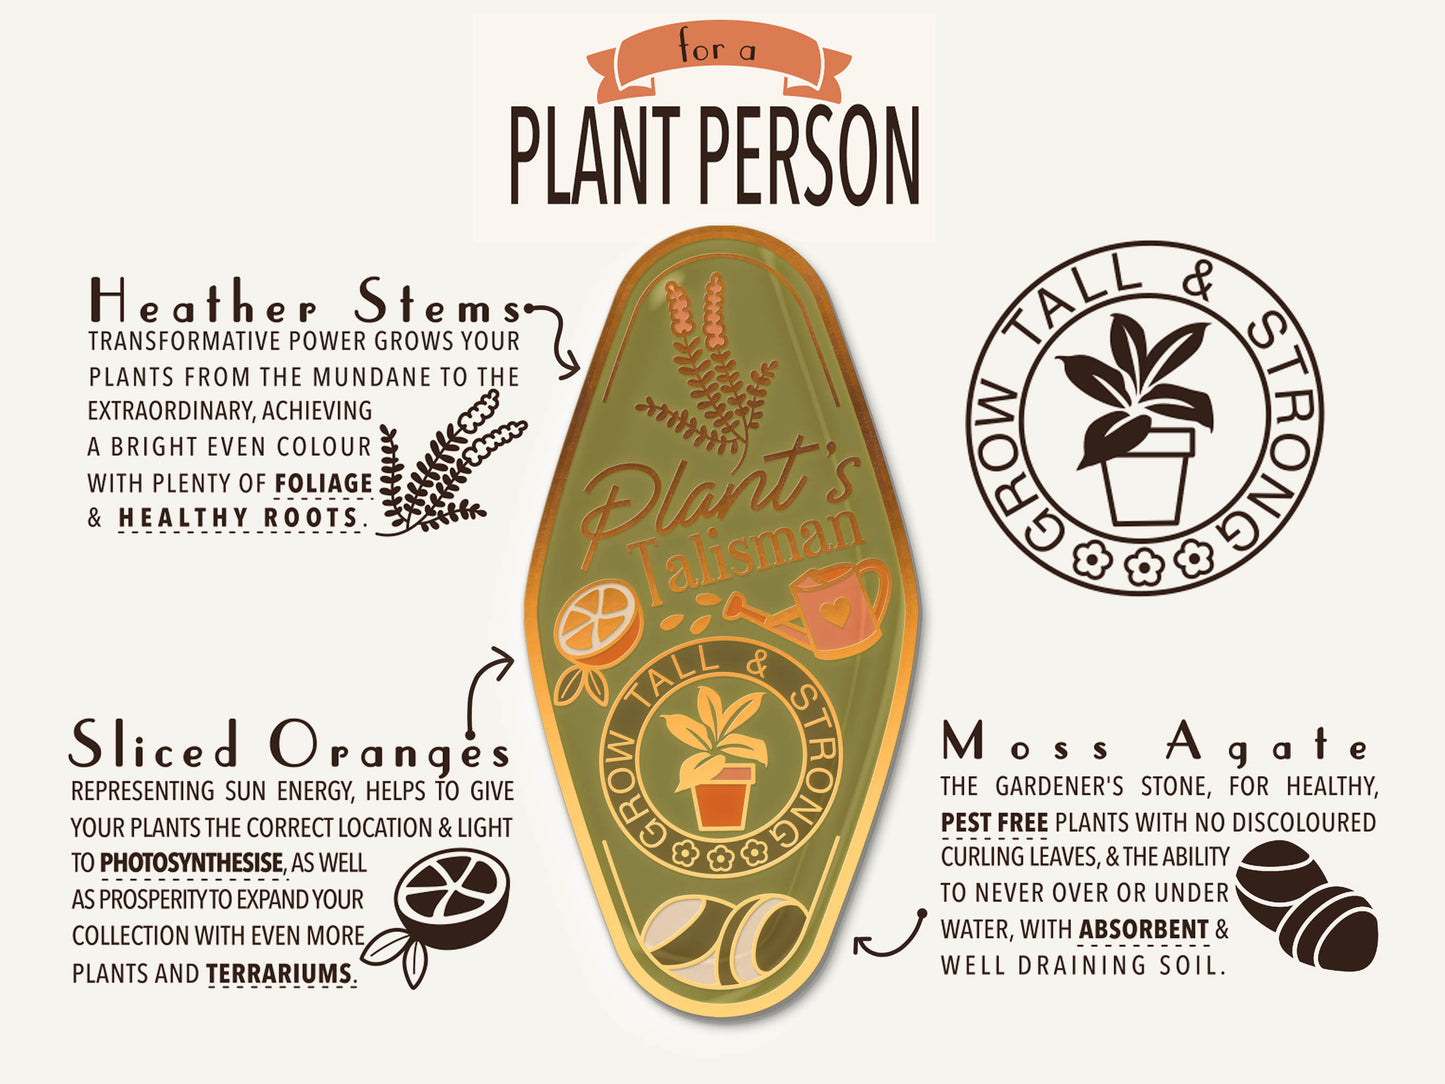 A illustrated diagram outline the symbolism of the different design elements of the for a plant person's Talisman pin. Information includes the meaning of the heather stems, sliced oranges and moss agate